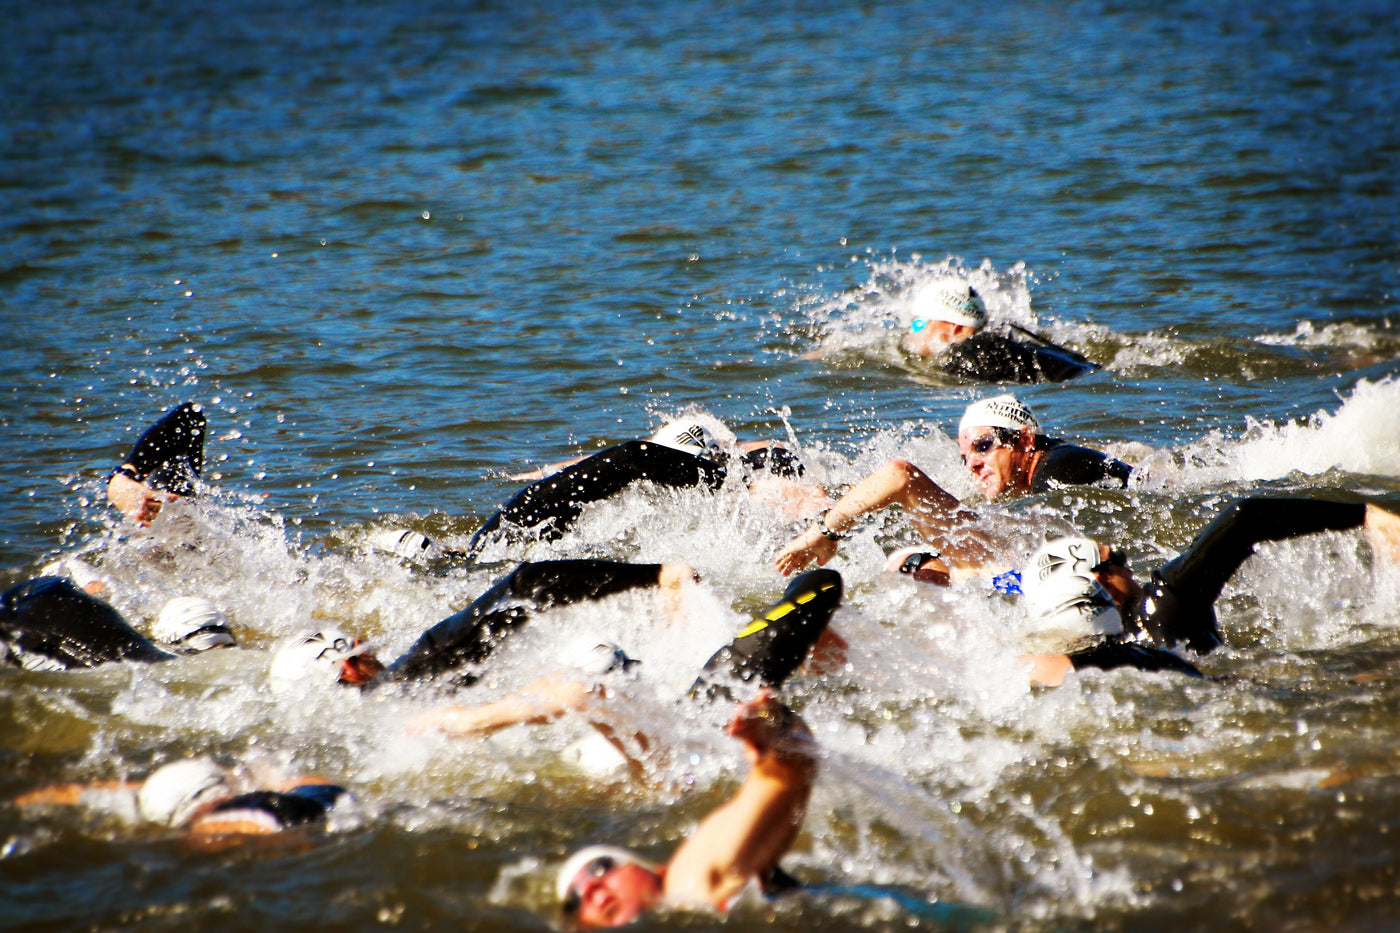 Group of triathletes swimming in open water during a triathlon race